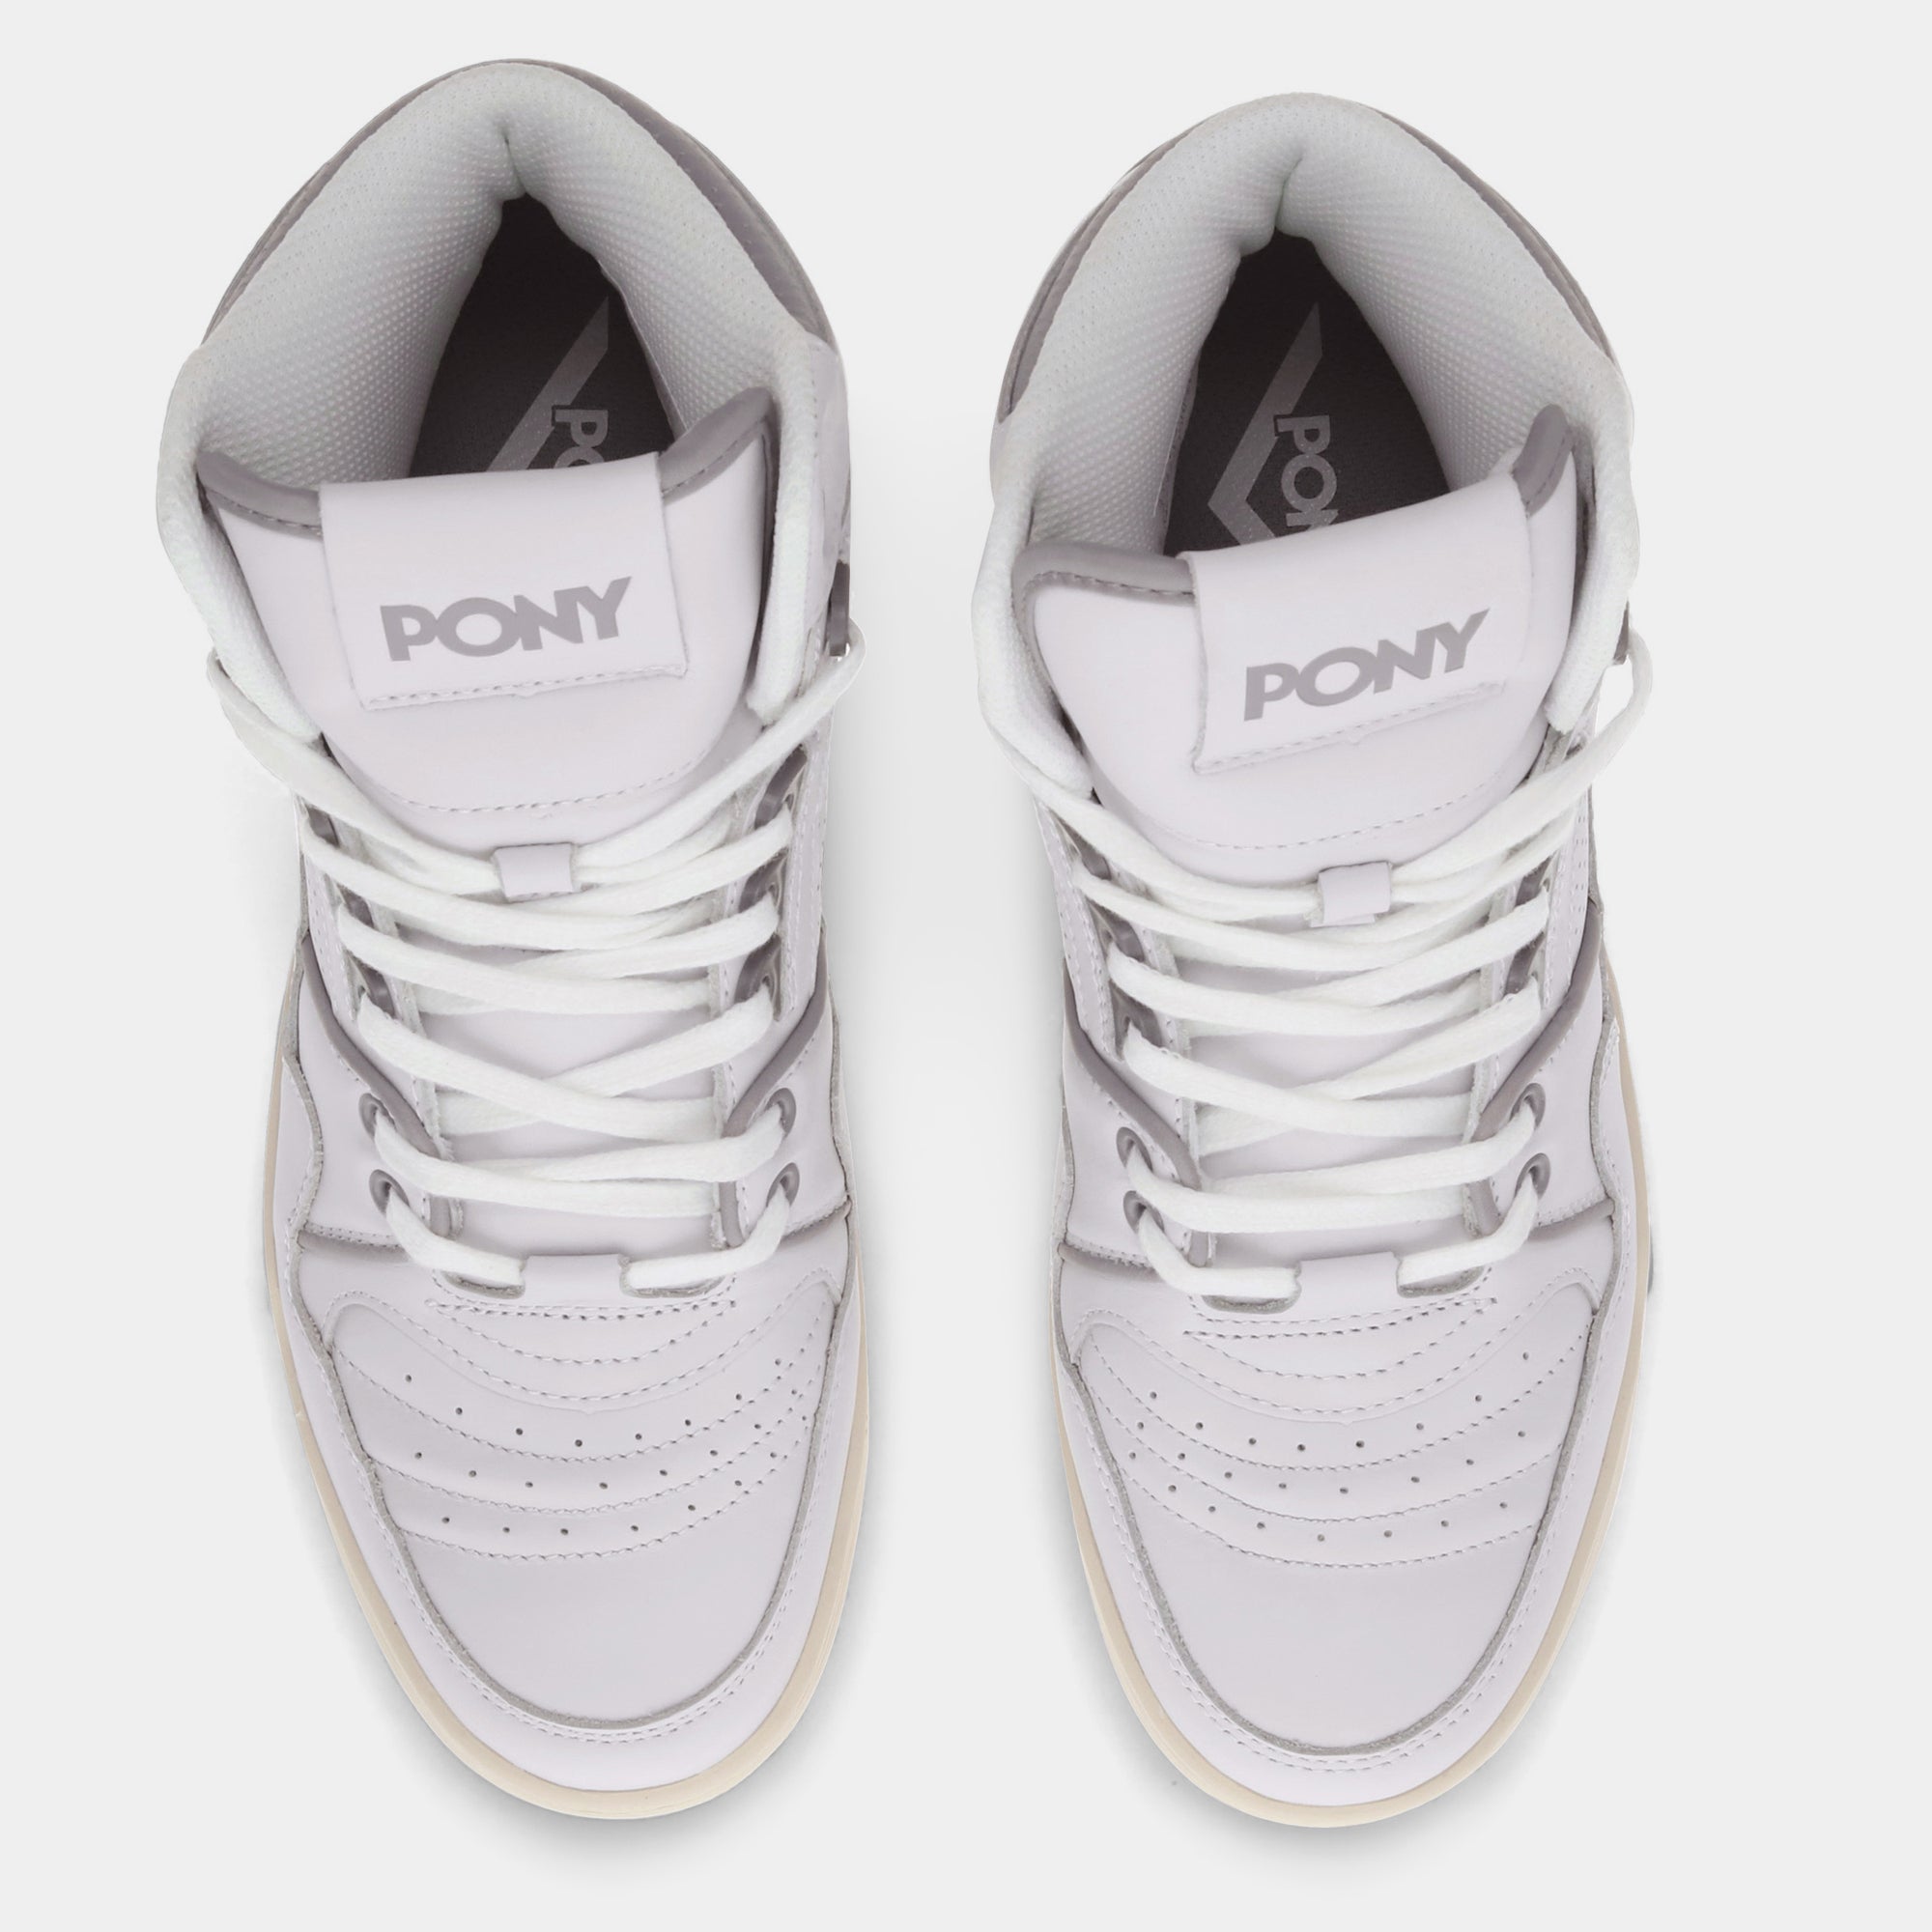 Overhead view of PONY High top shoes featuring the O+PONY wordmark on both tongues and PONY stamp on inner sole.